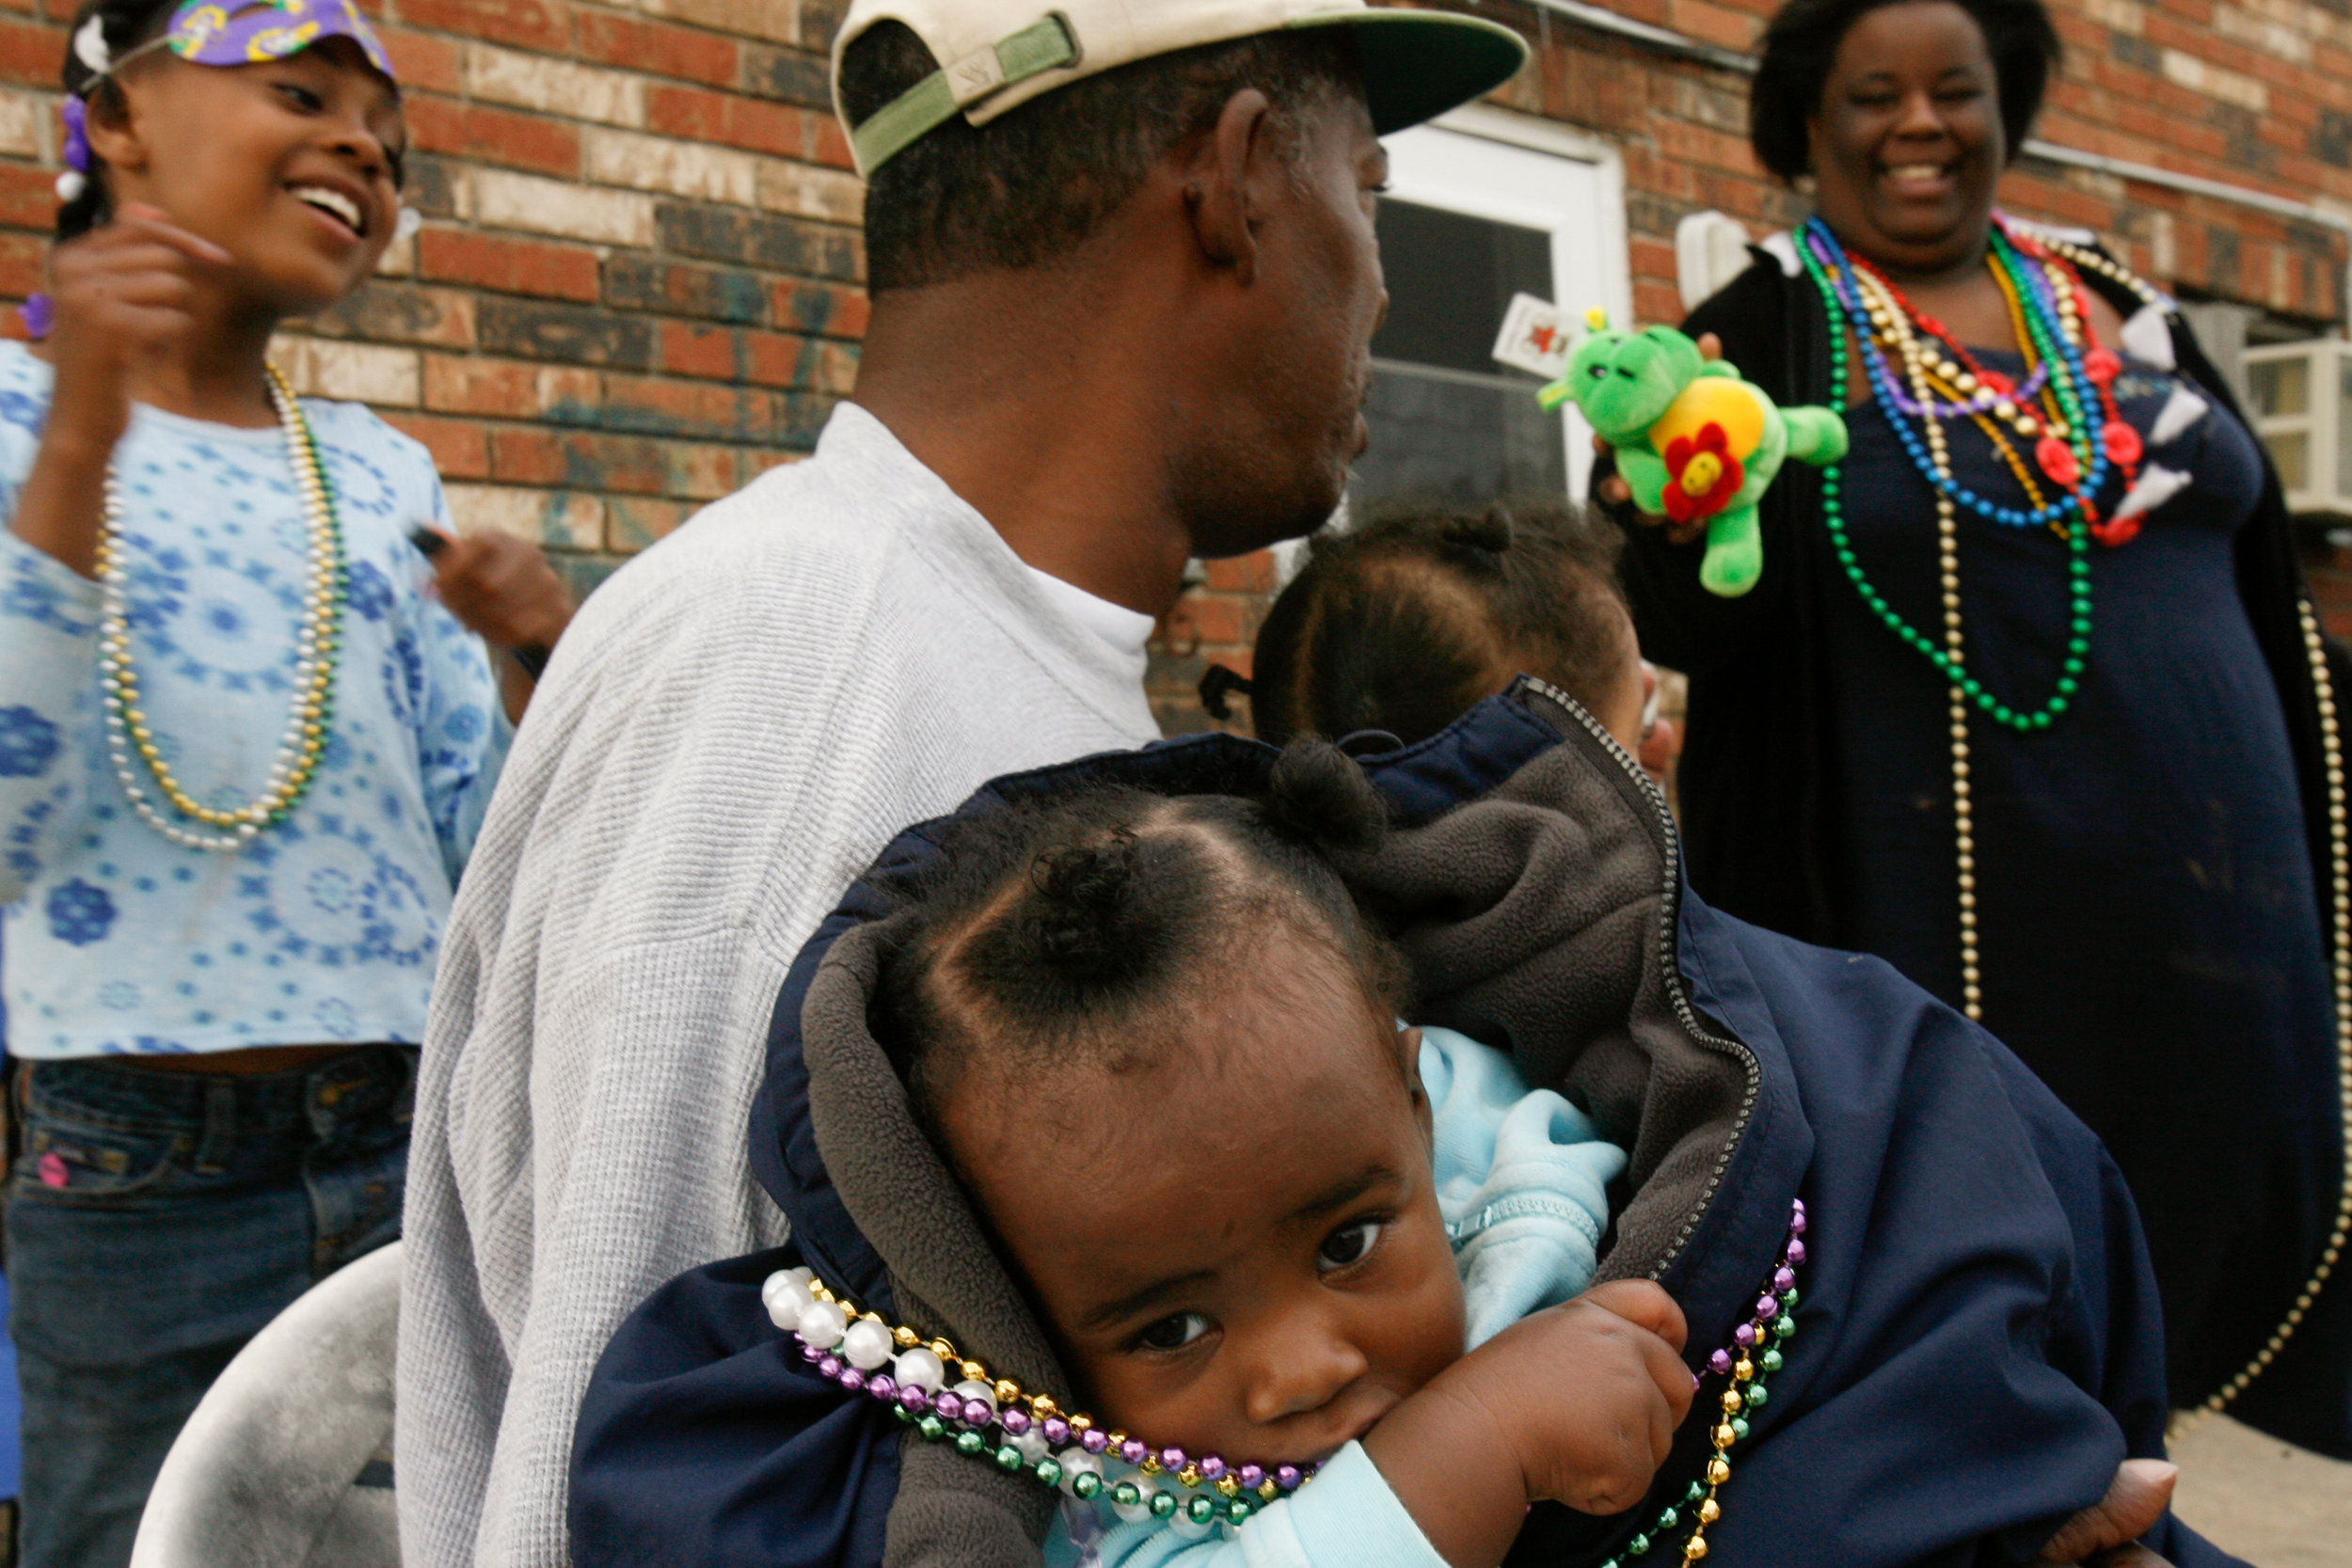  Parade watchers - Gentilly 